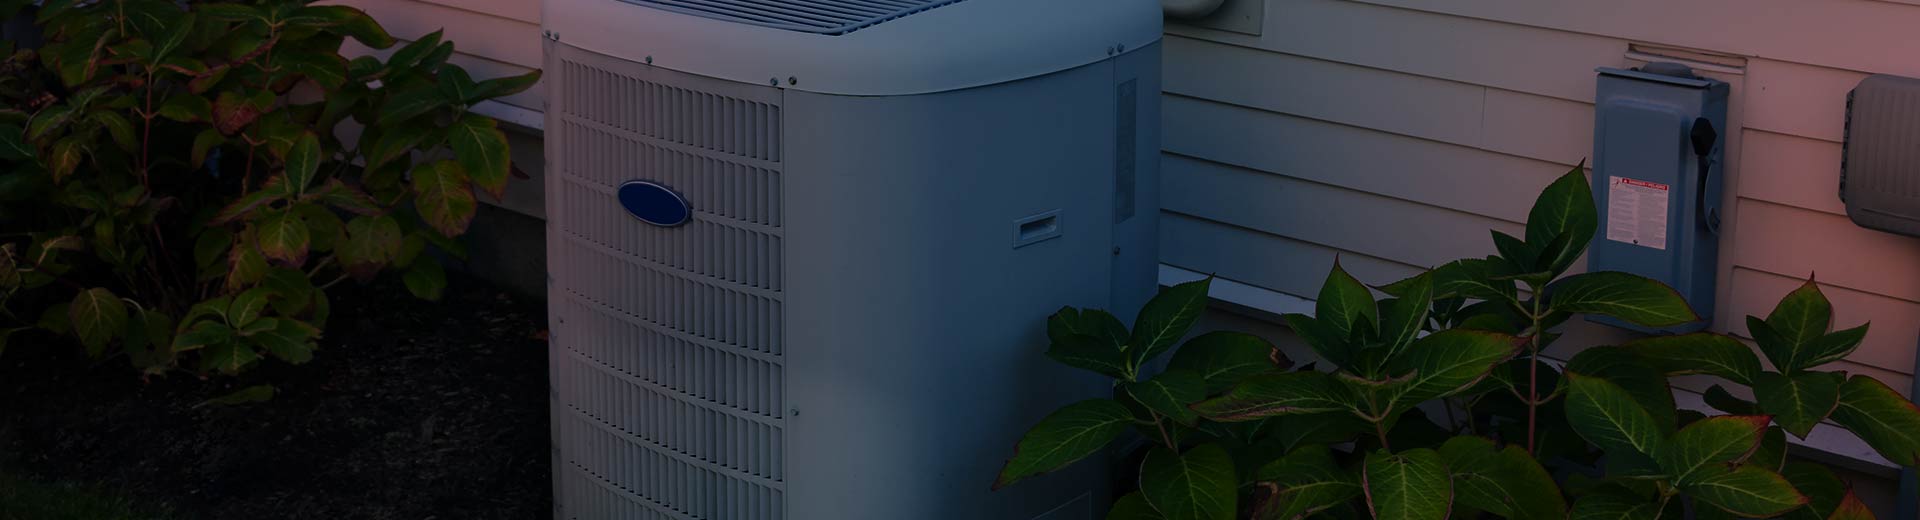 close up of an air conditioner uni installed outdoorst after replacement naples fl